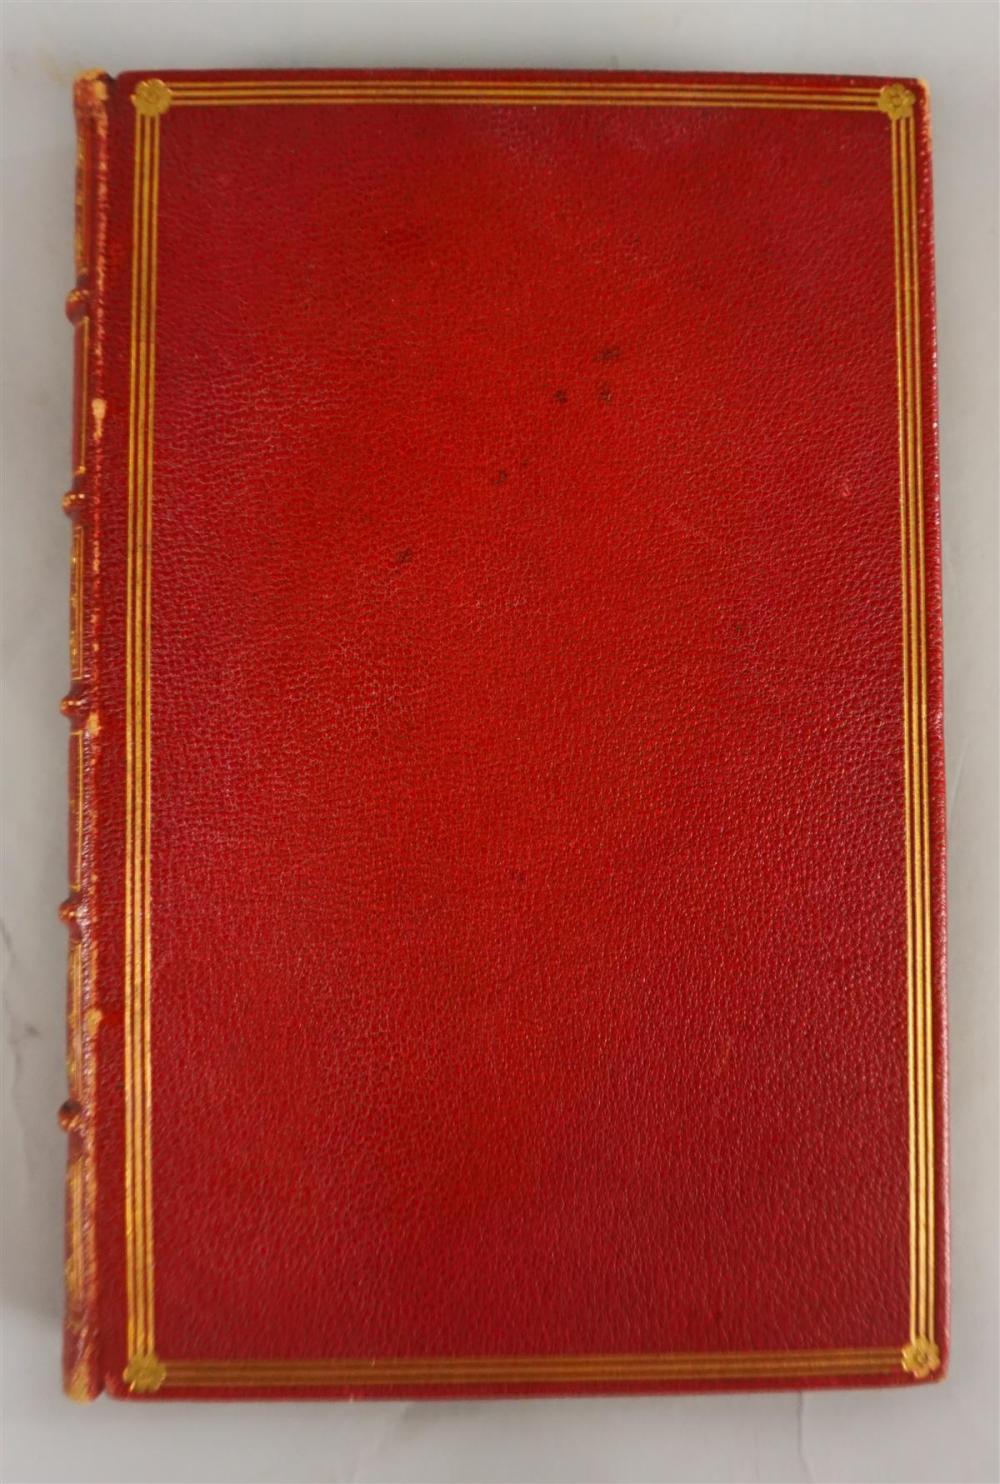 CLEMENTS J ENGLISH BOOK PLATESCLEMENTS  312bf8